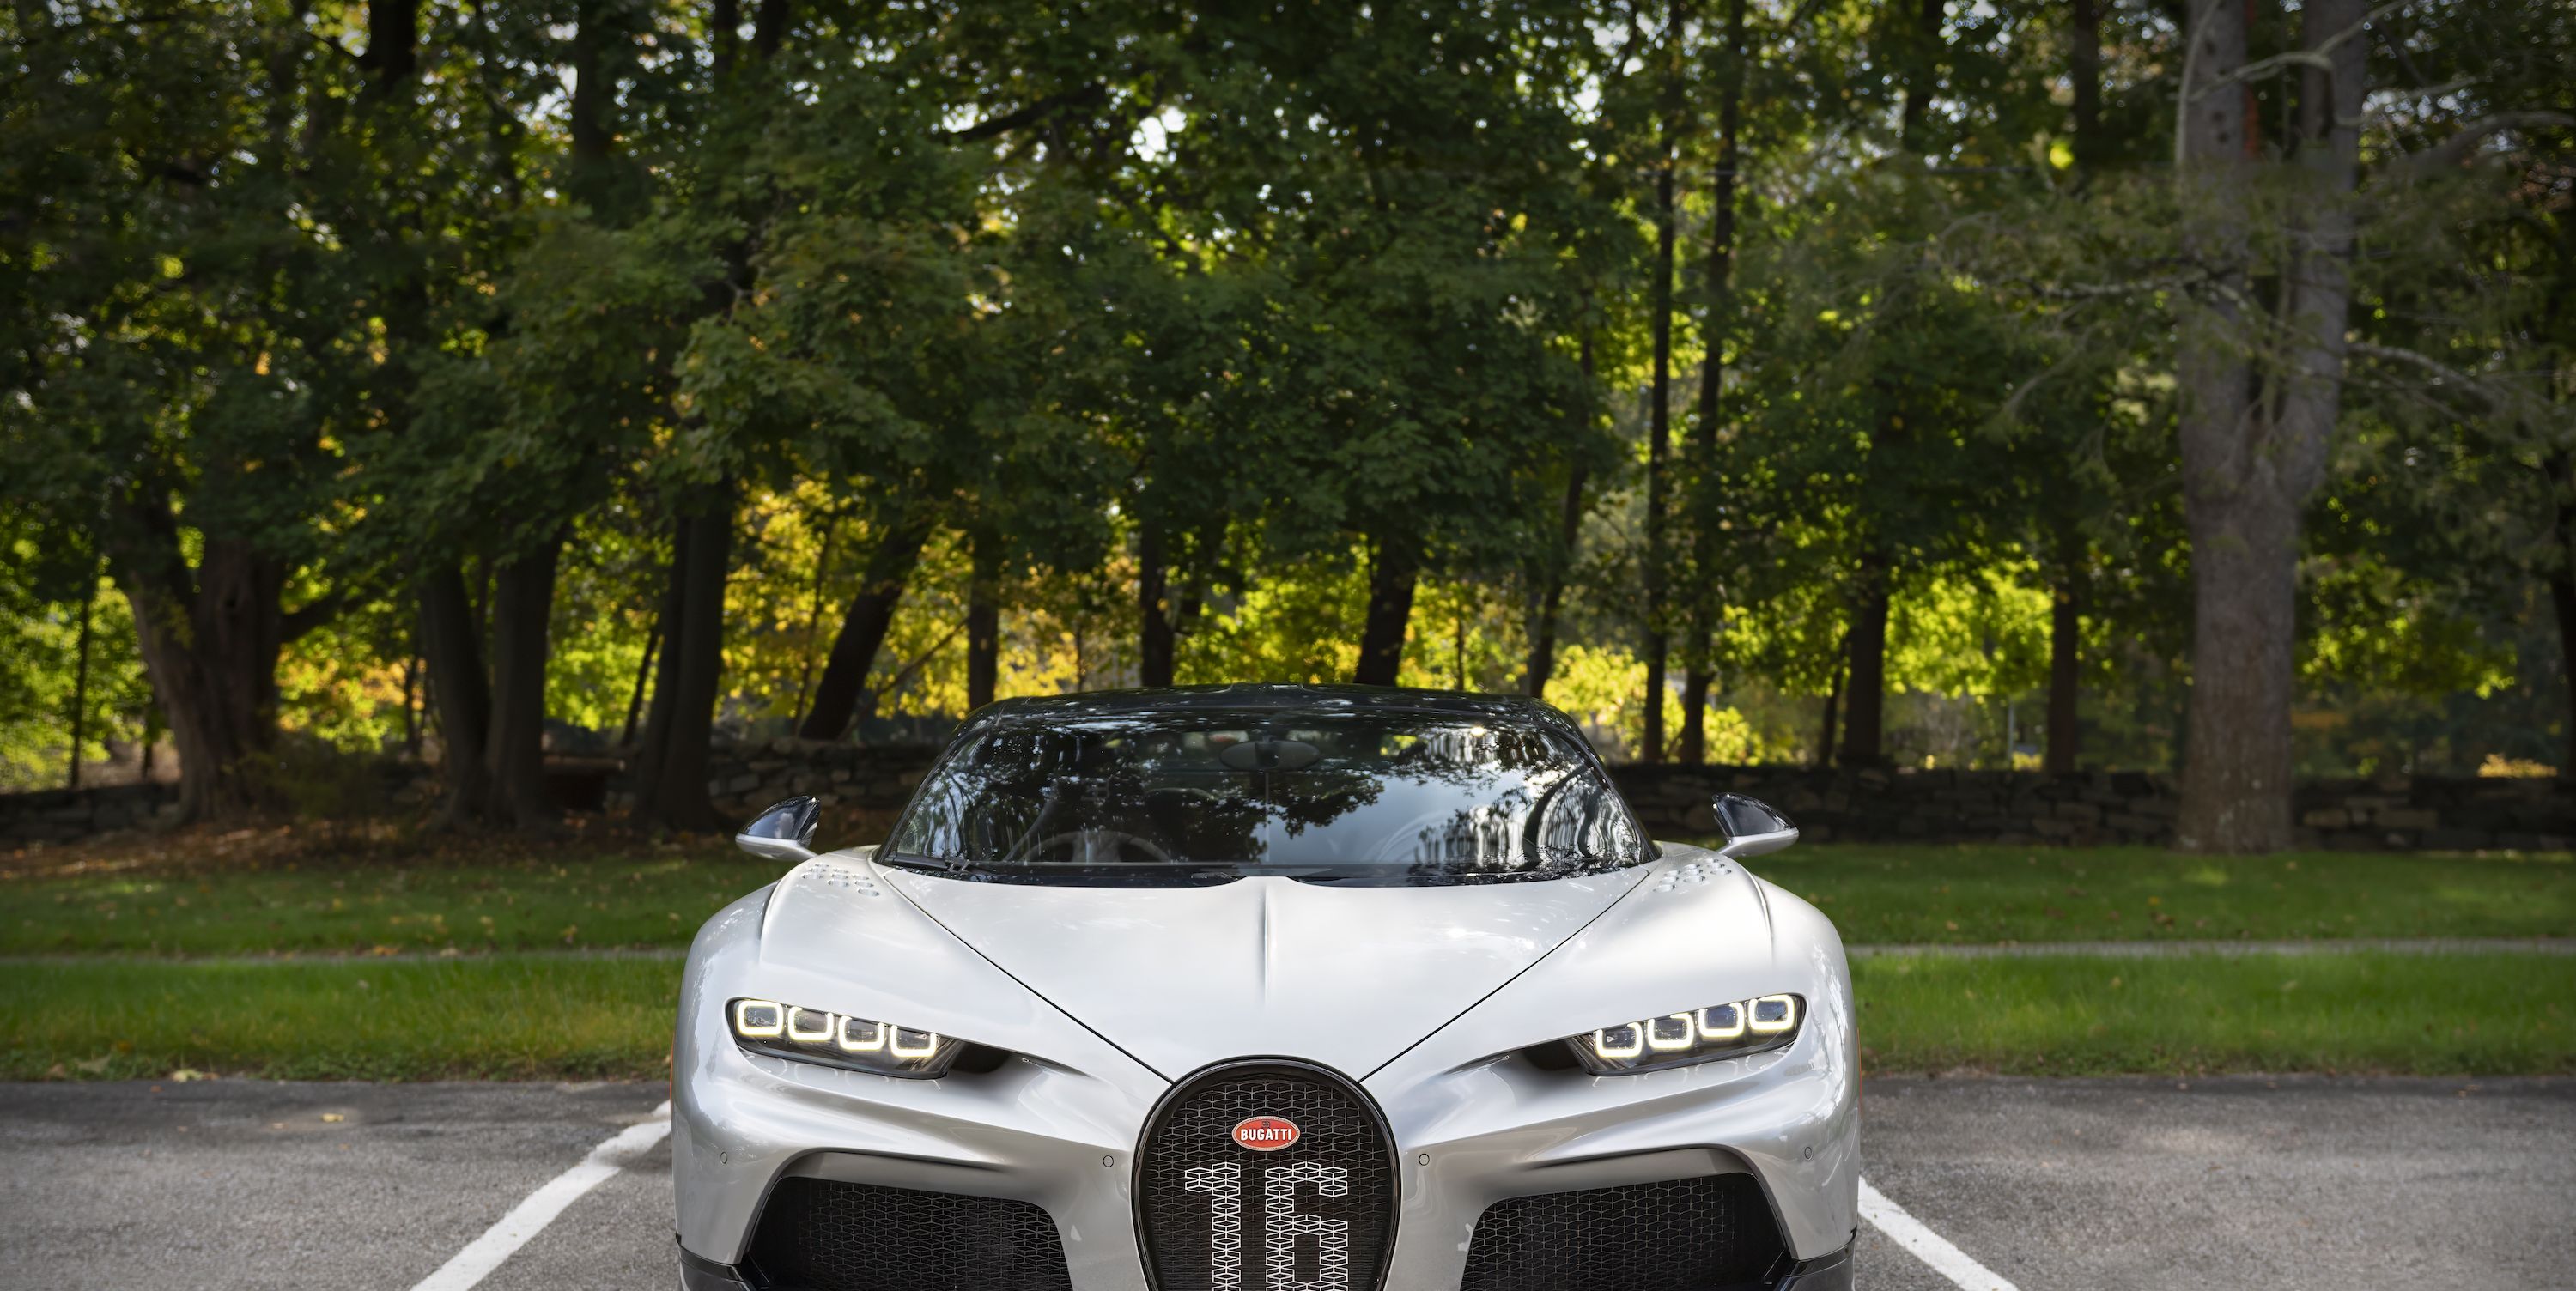 Why the Bugatti Chiron Is As Impressive Now as It Was in 2016